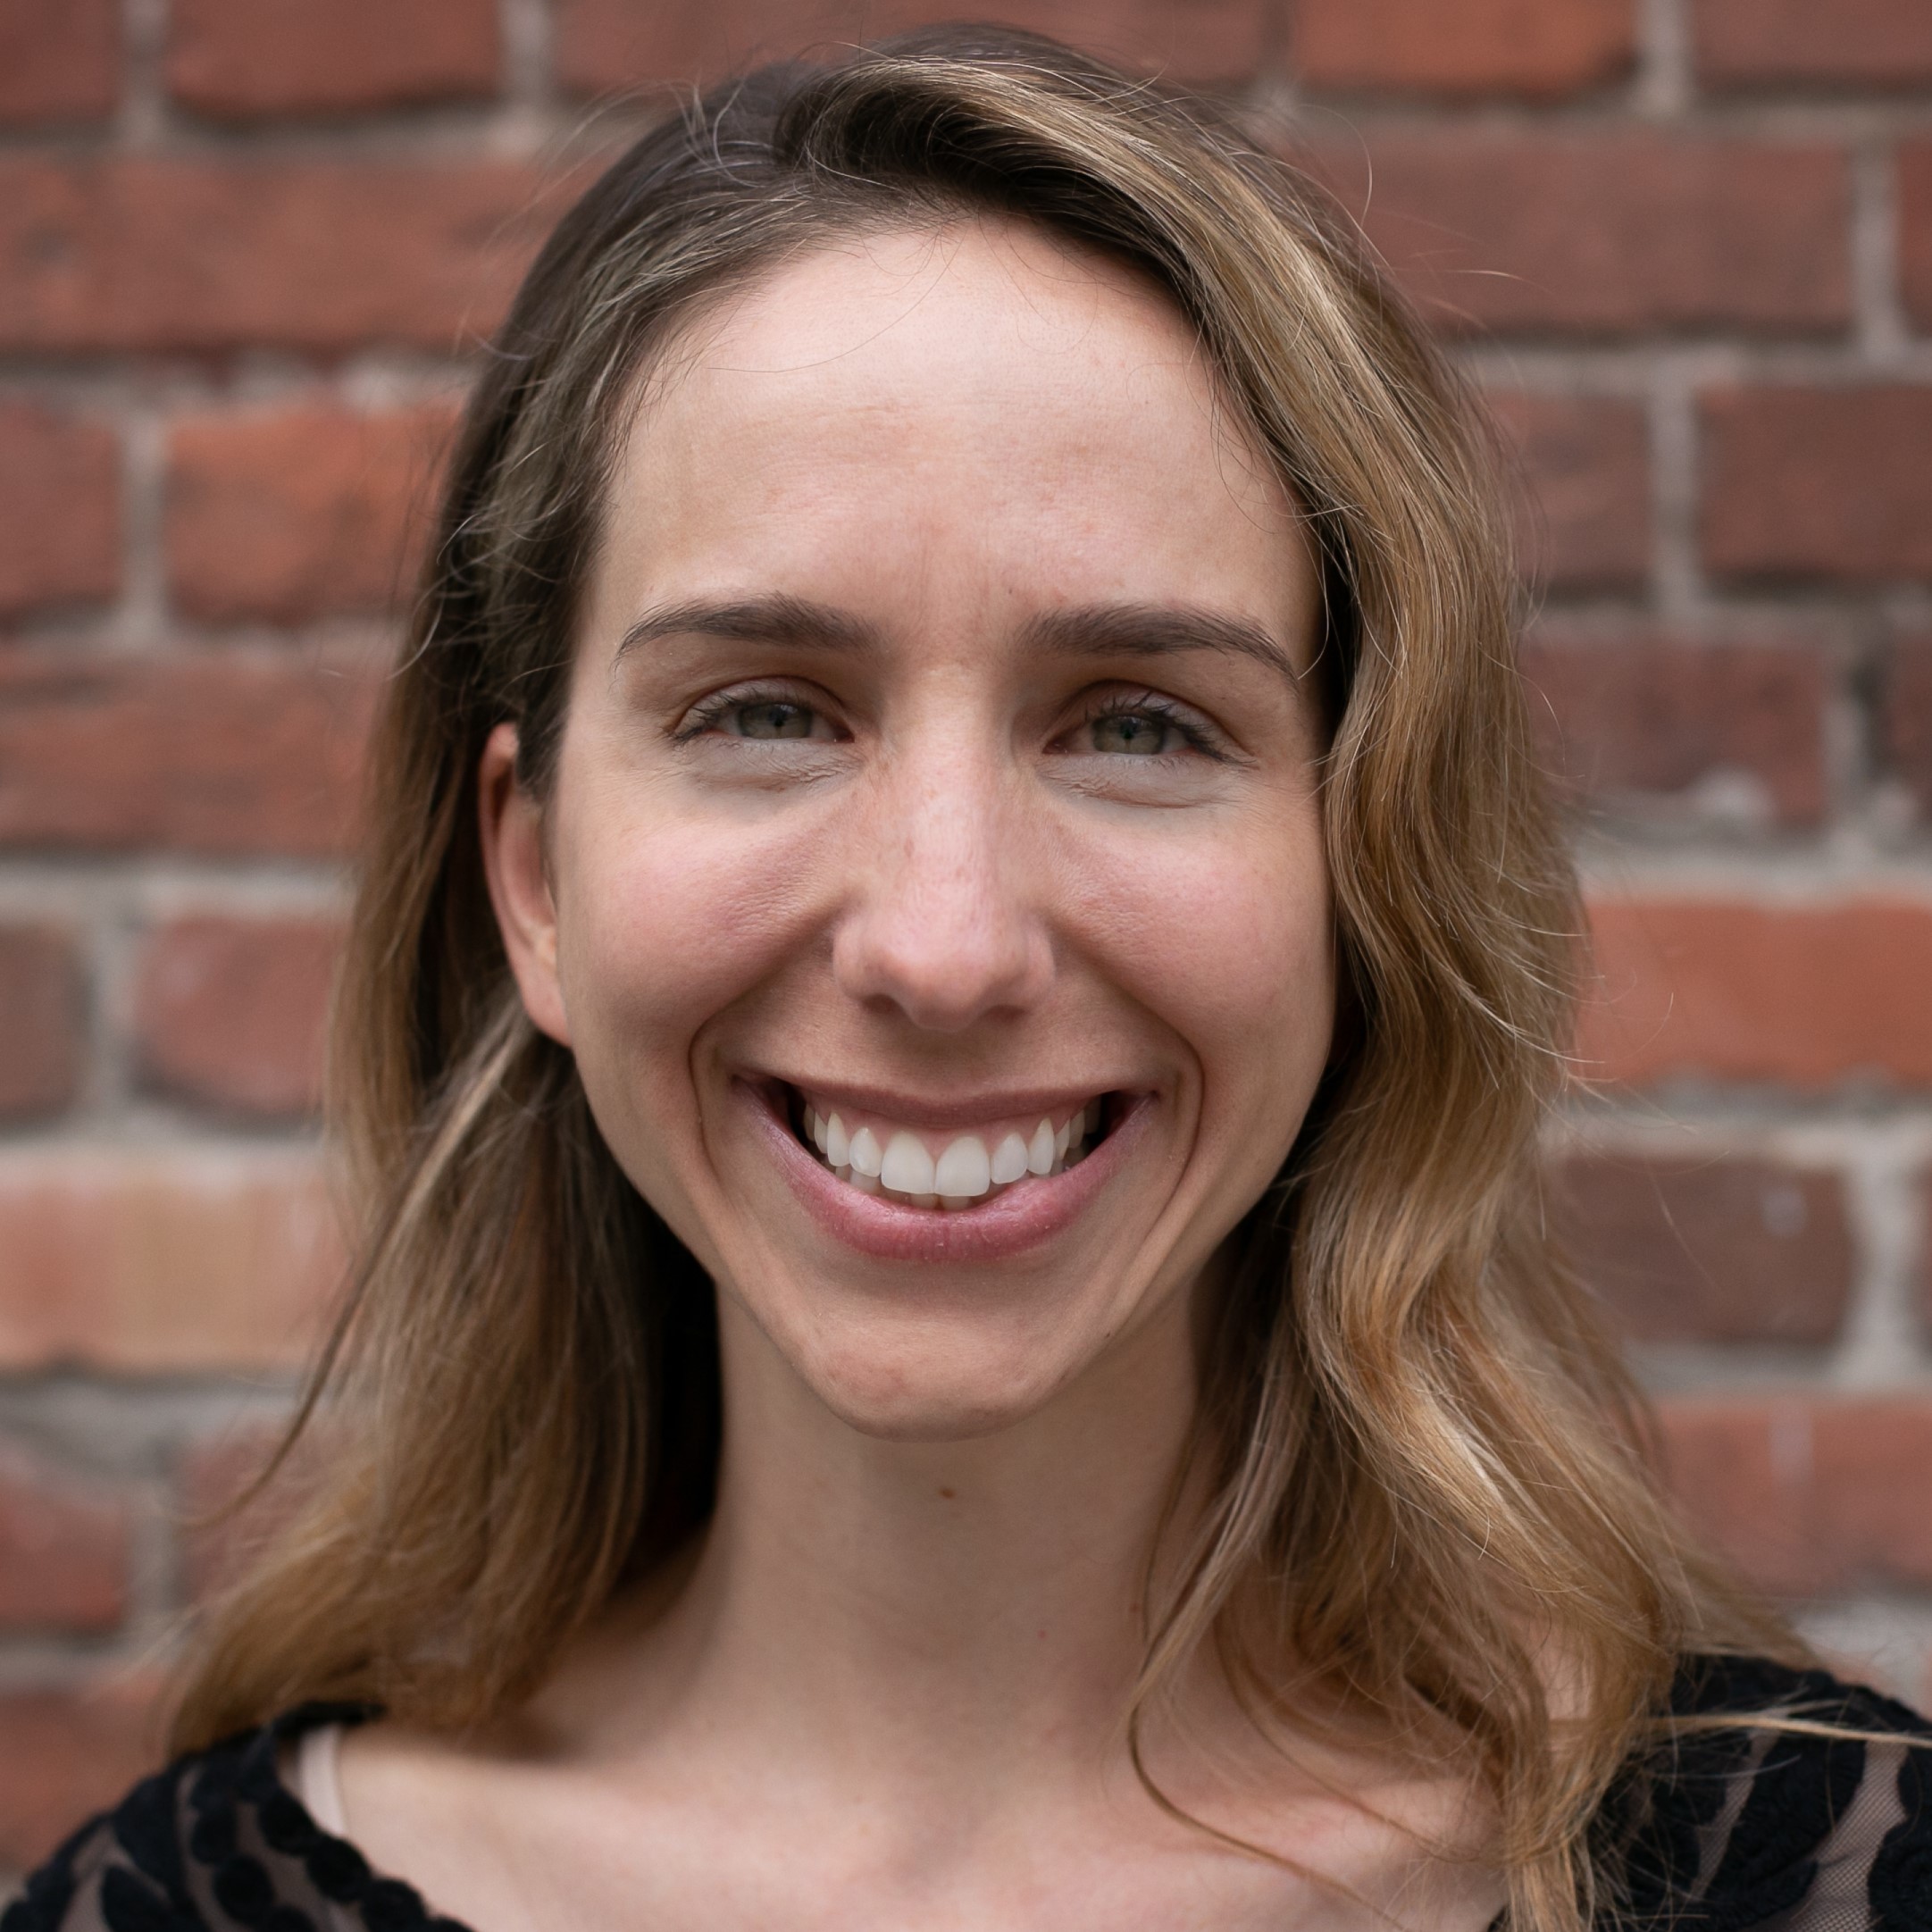 <hr></hr>Alana Frome (she/her)
<br>Co-Founder and Chief Technology Officer
<br>HiMama
